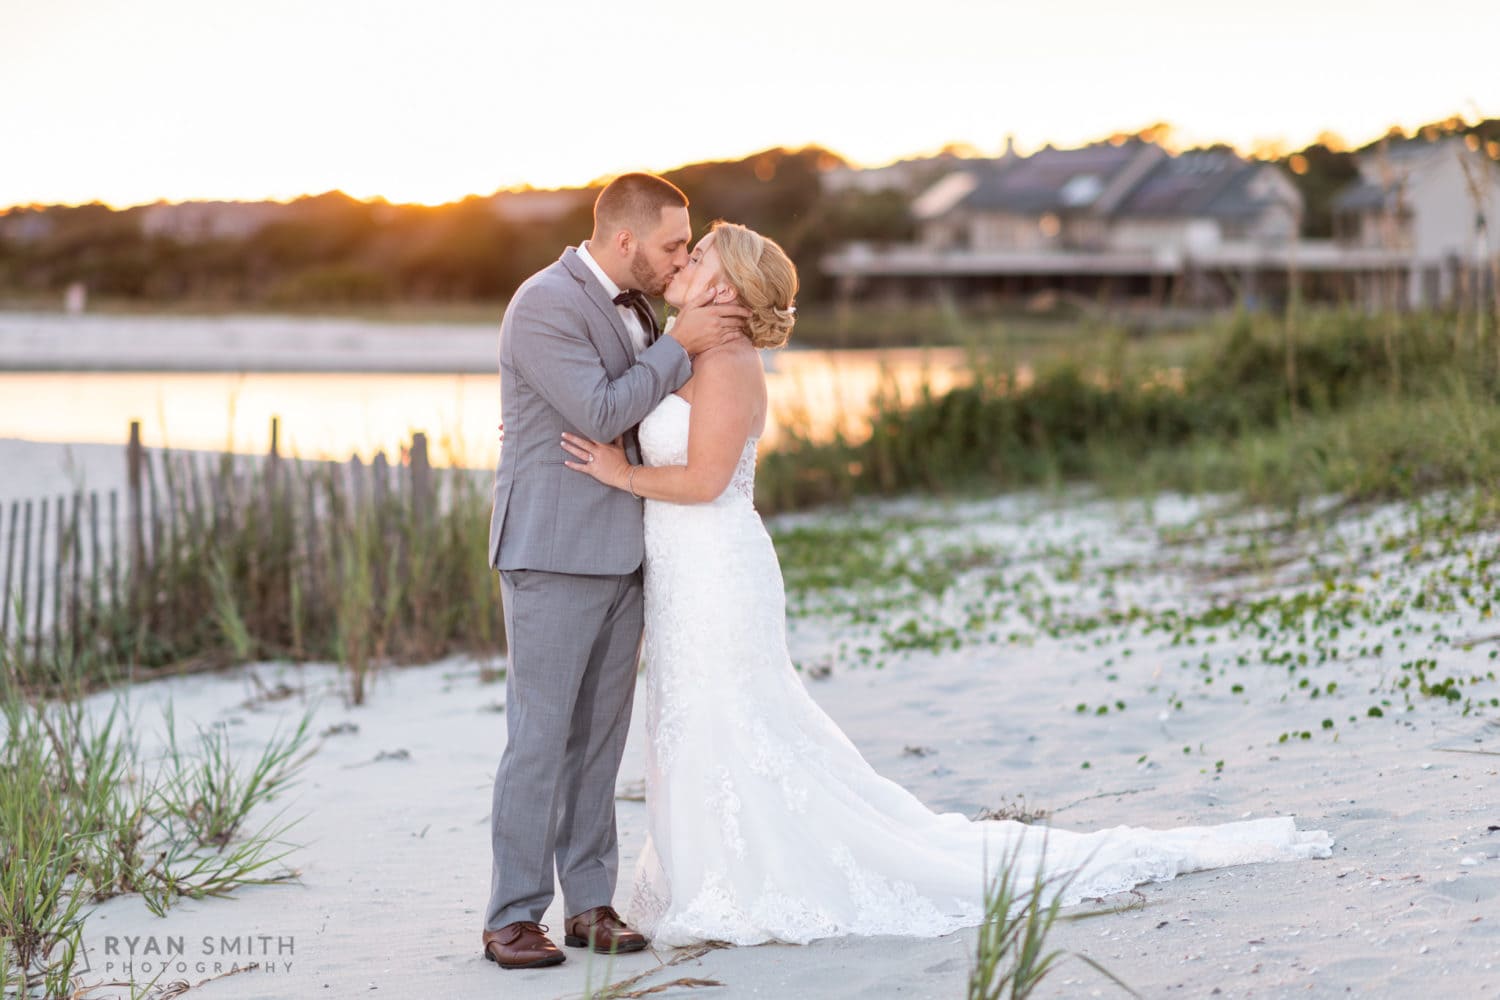 Portraits of bride and groom backlit by the sunset - 21 Main Events - North Myrtle Beach